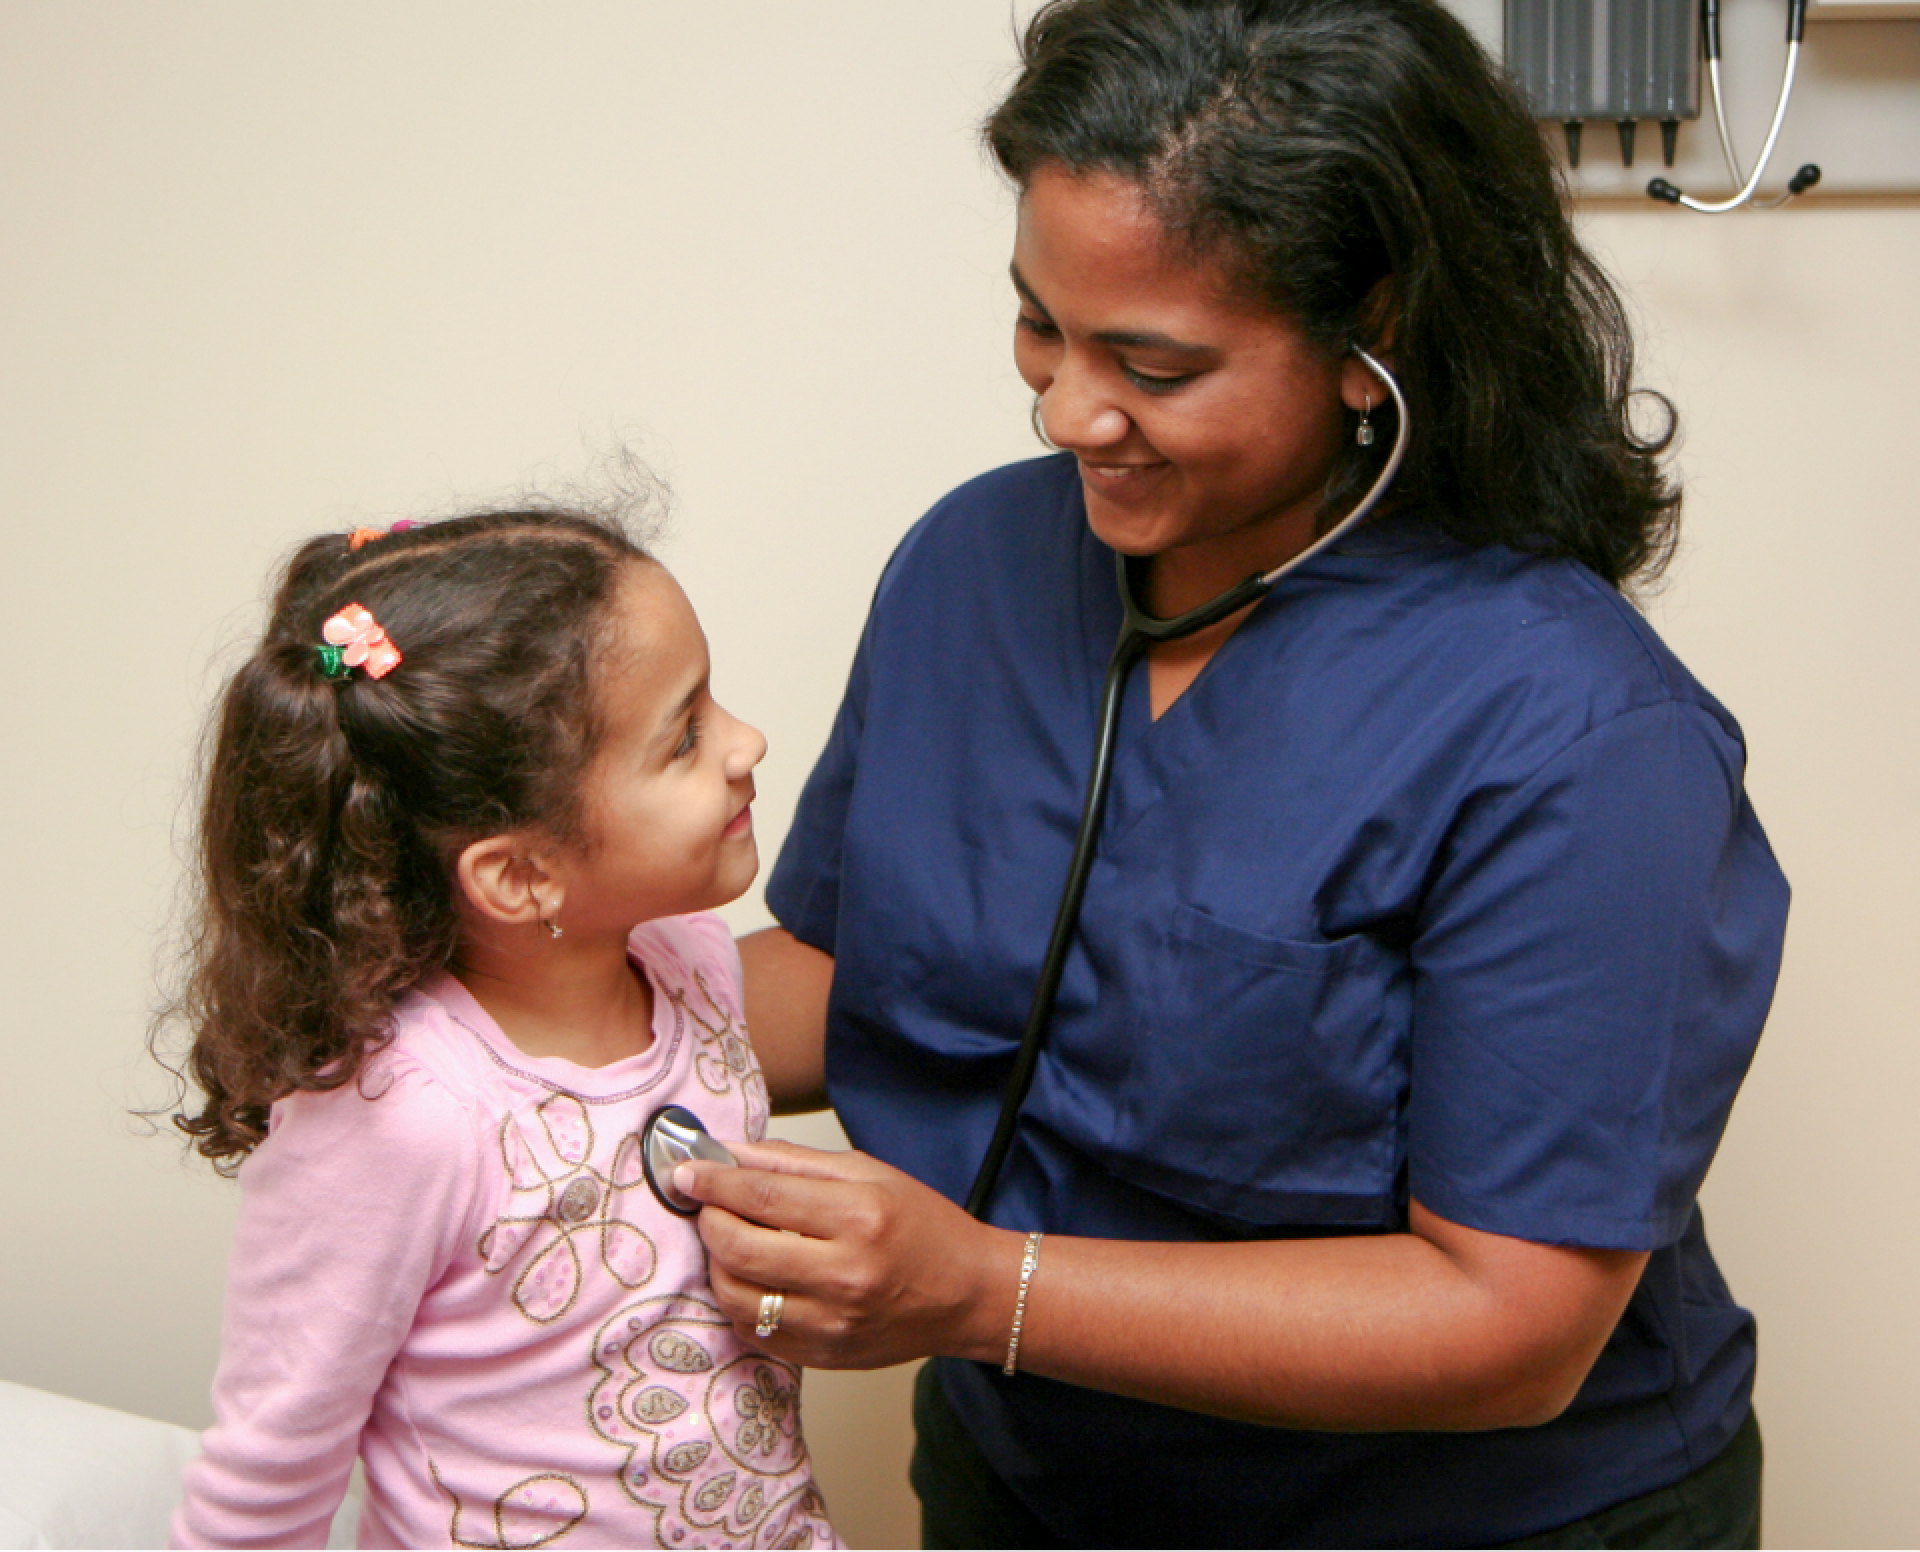 Healthcare professional listens to child's heartbeat with a stethoscope